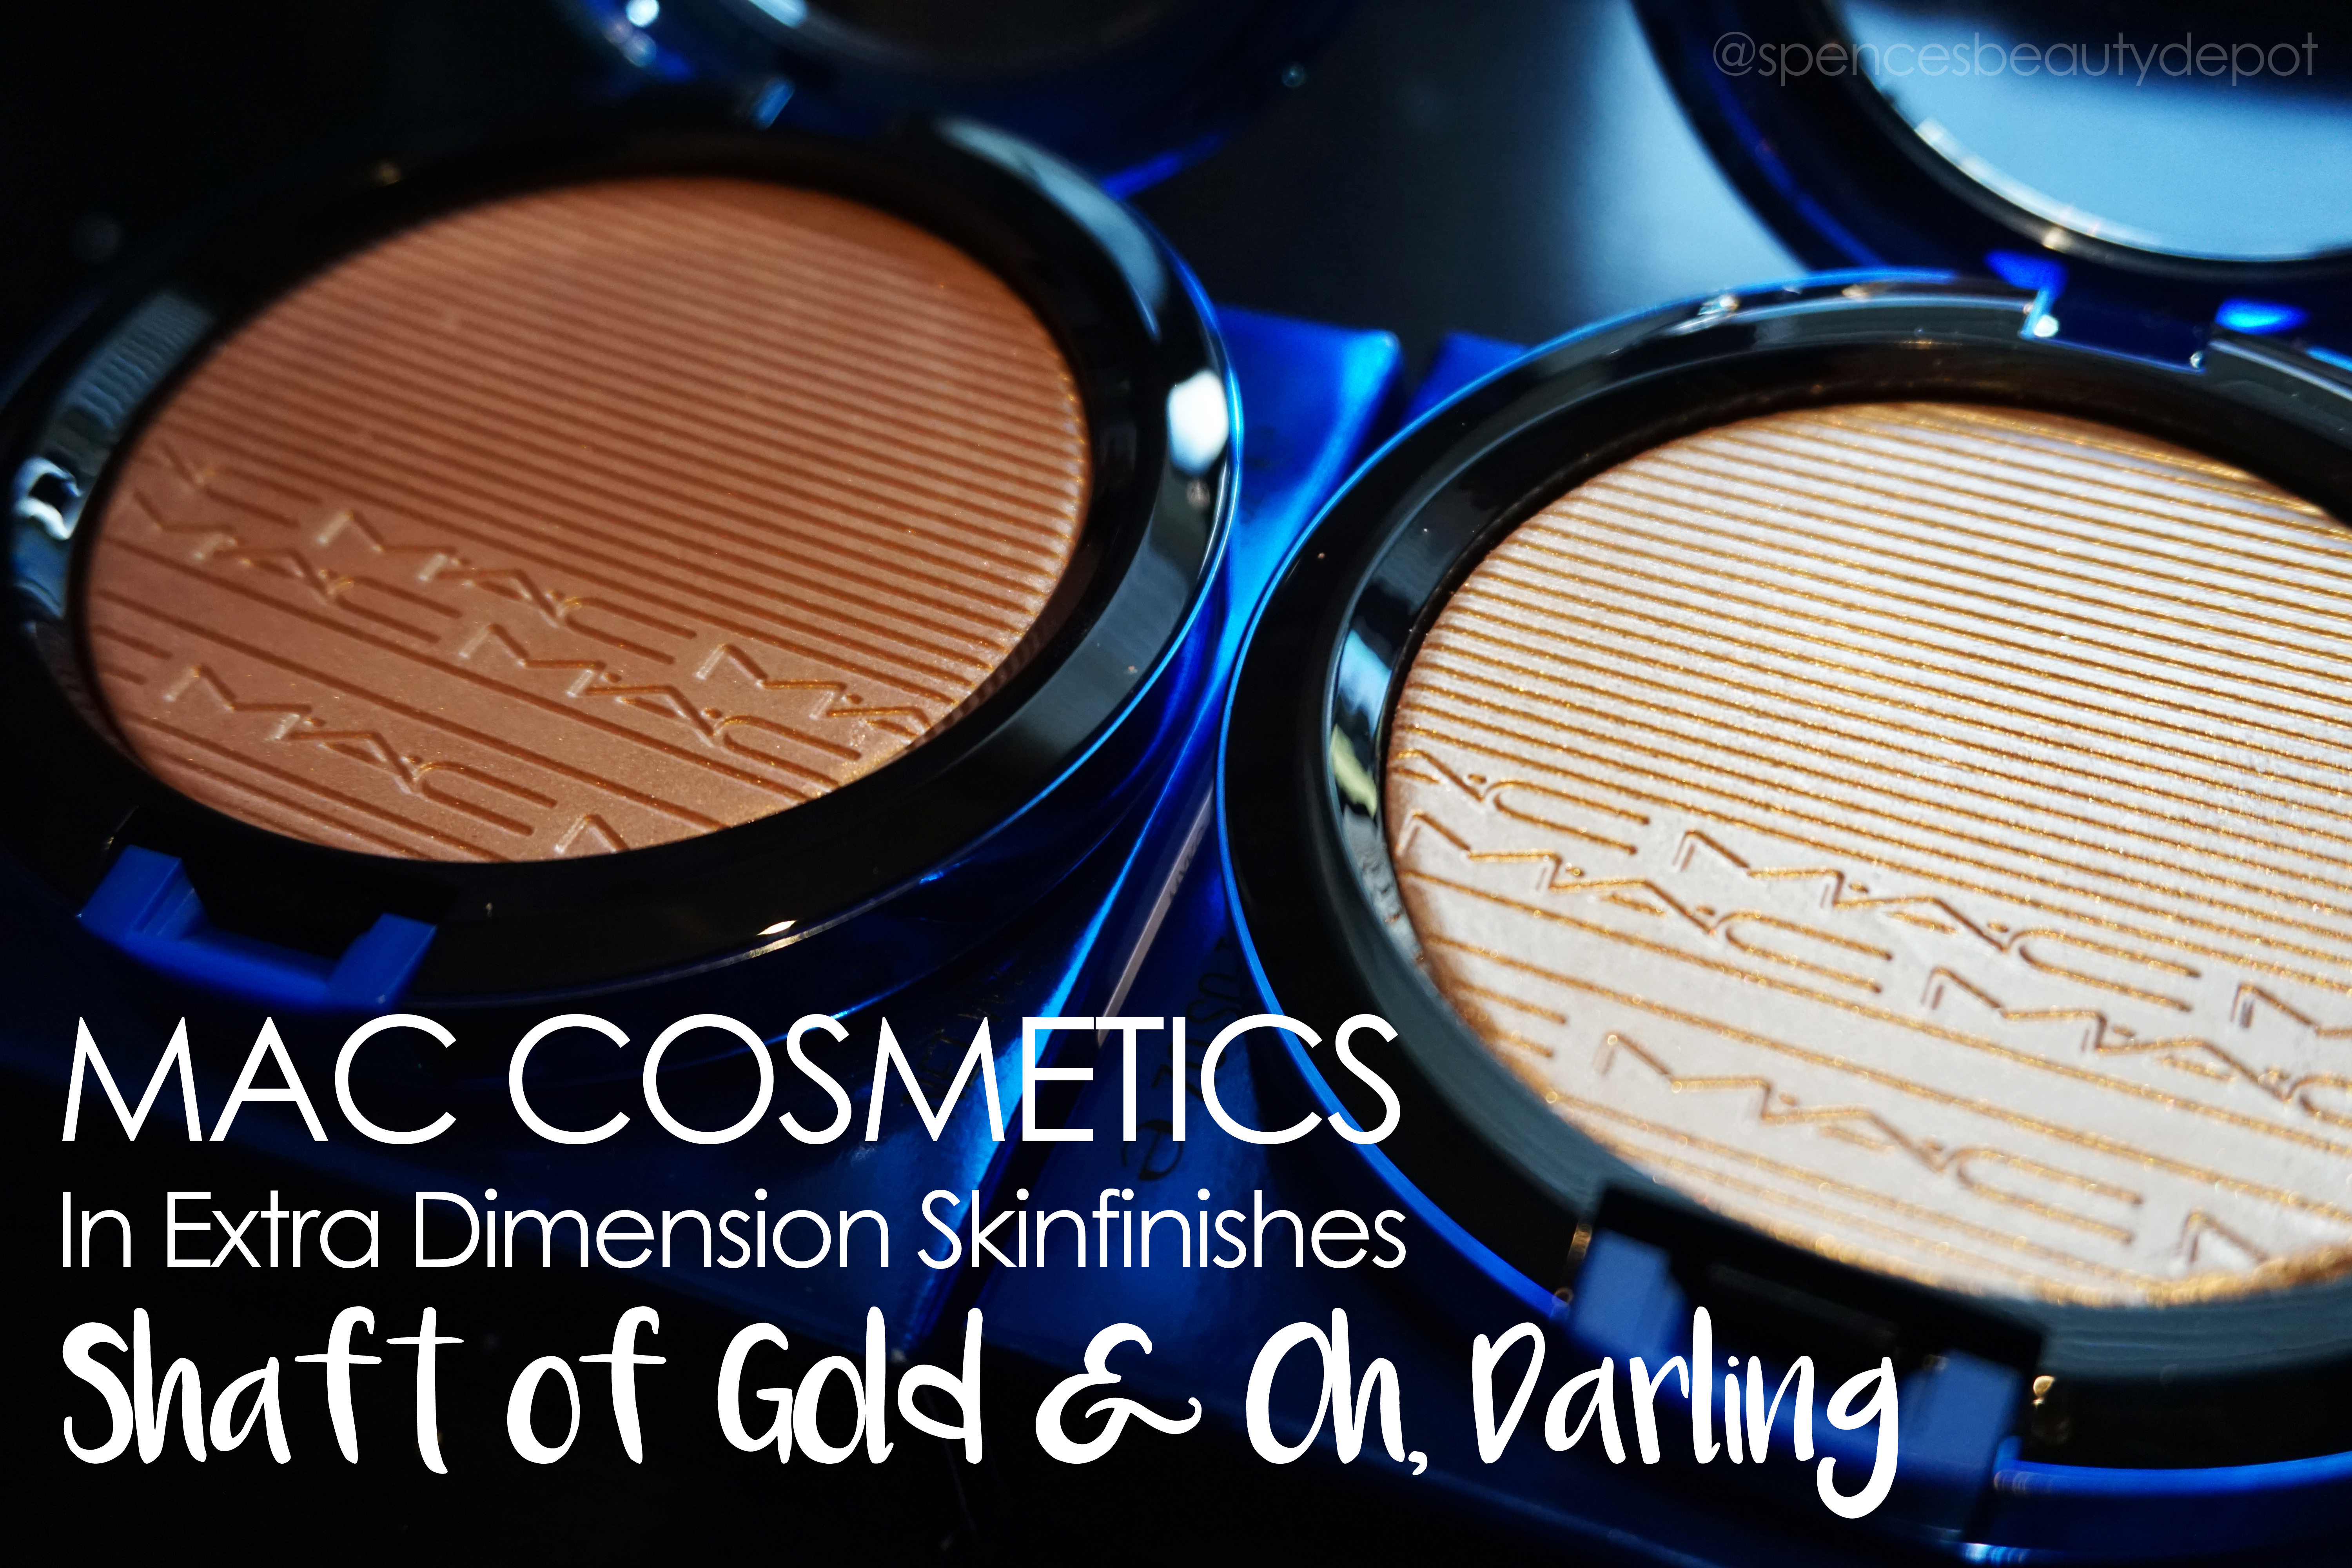 Review: MAC Cosmetics Magic the Night Extra Dimension Skin Finish 'Oh Darling' & 'Shaft of Gold' – Spence's Beauty